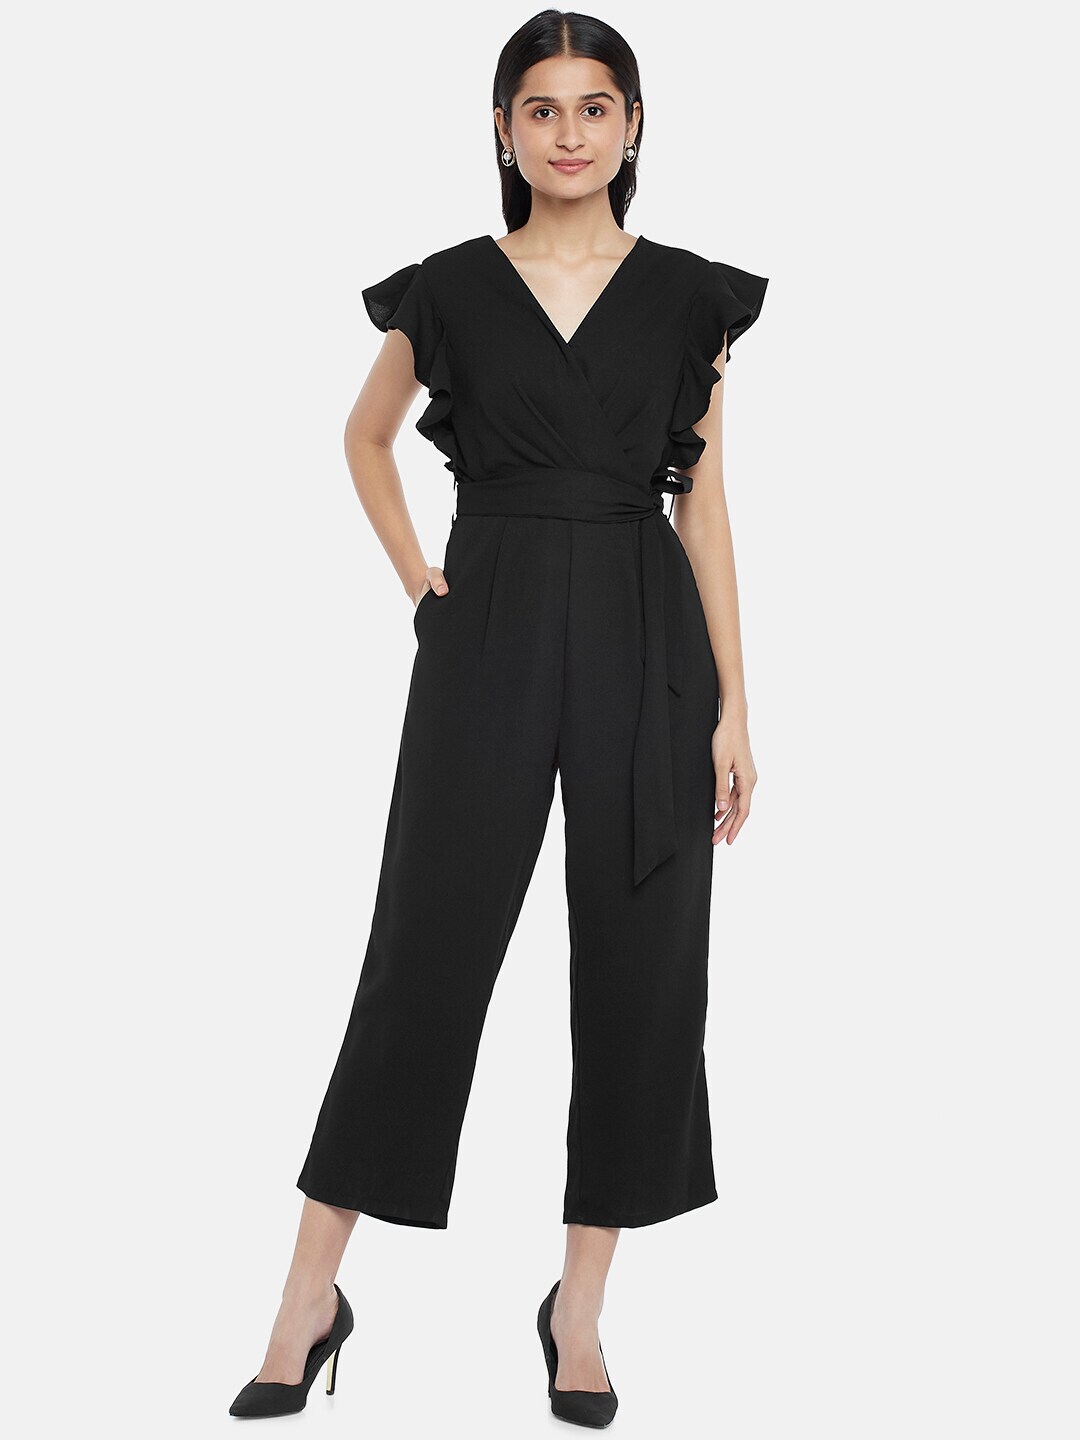 Annabelle by Pantaloons Black Basic Jumpsuit with Ruffles Price in India